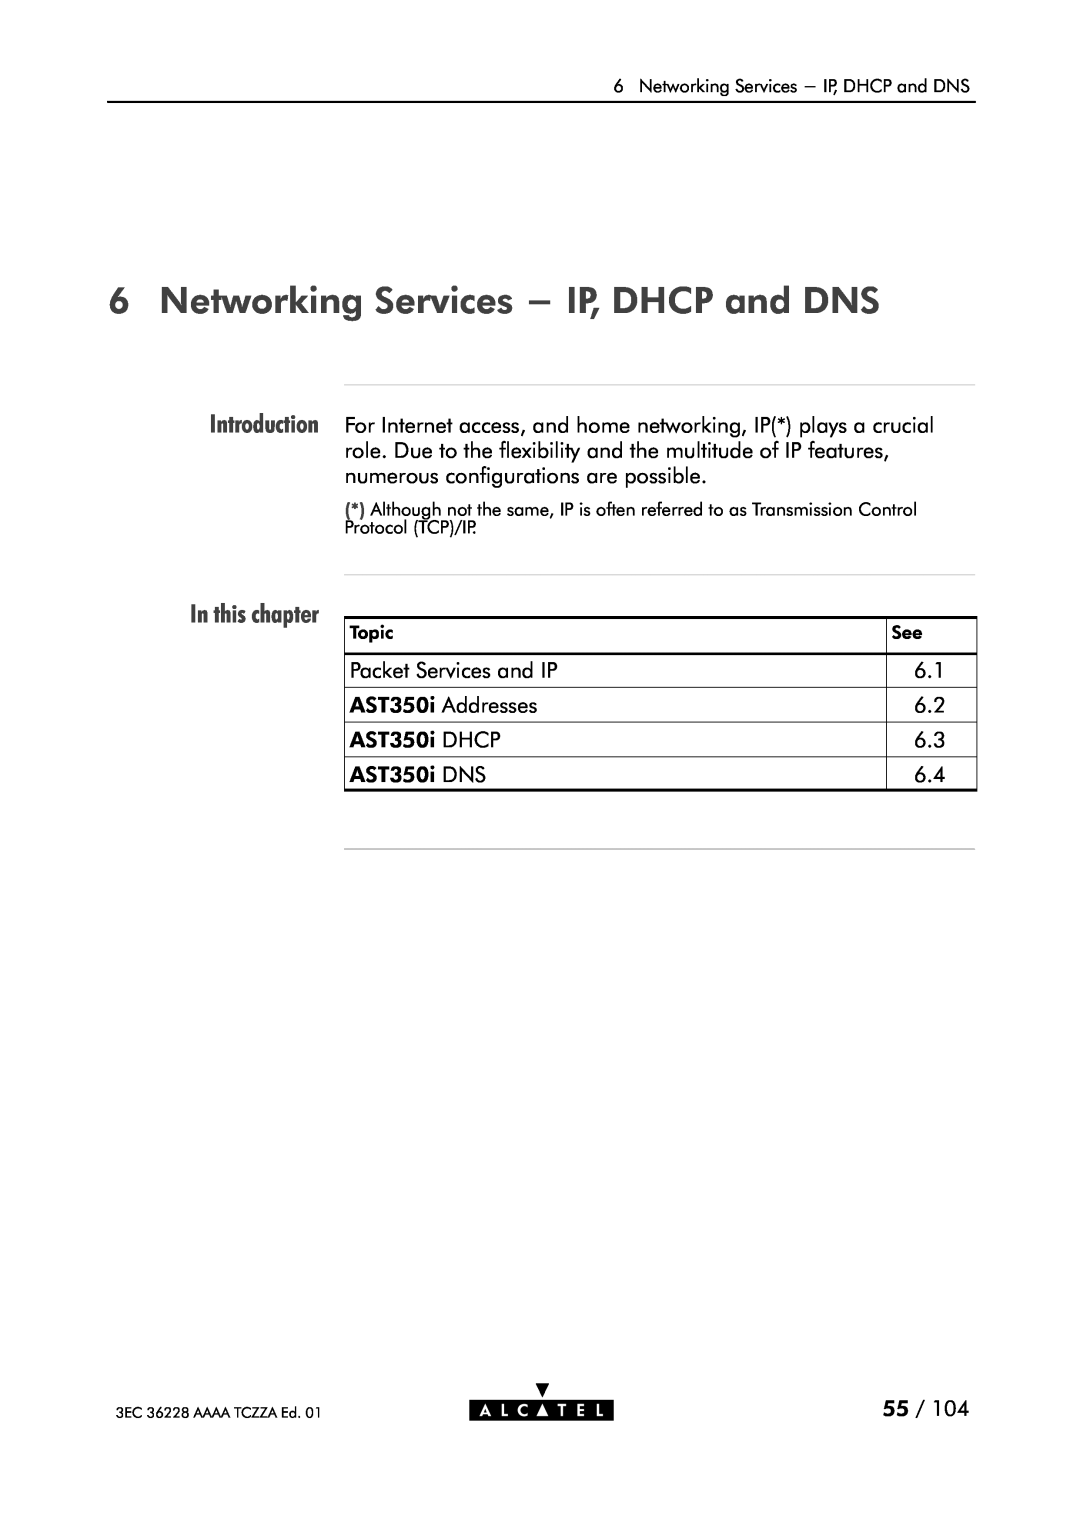 Alcatel Carrier Internetworking Solutions 350I manual Networking Services - IP, DHCP and DNS, In this chapter 